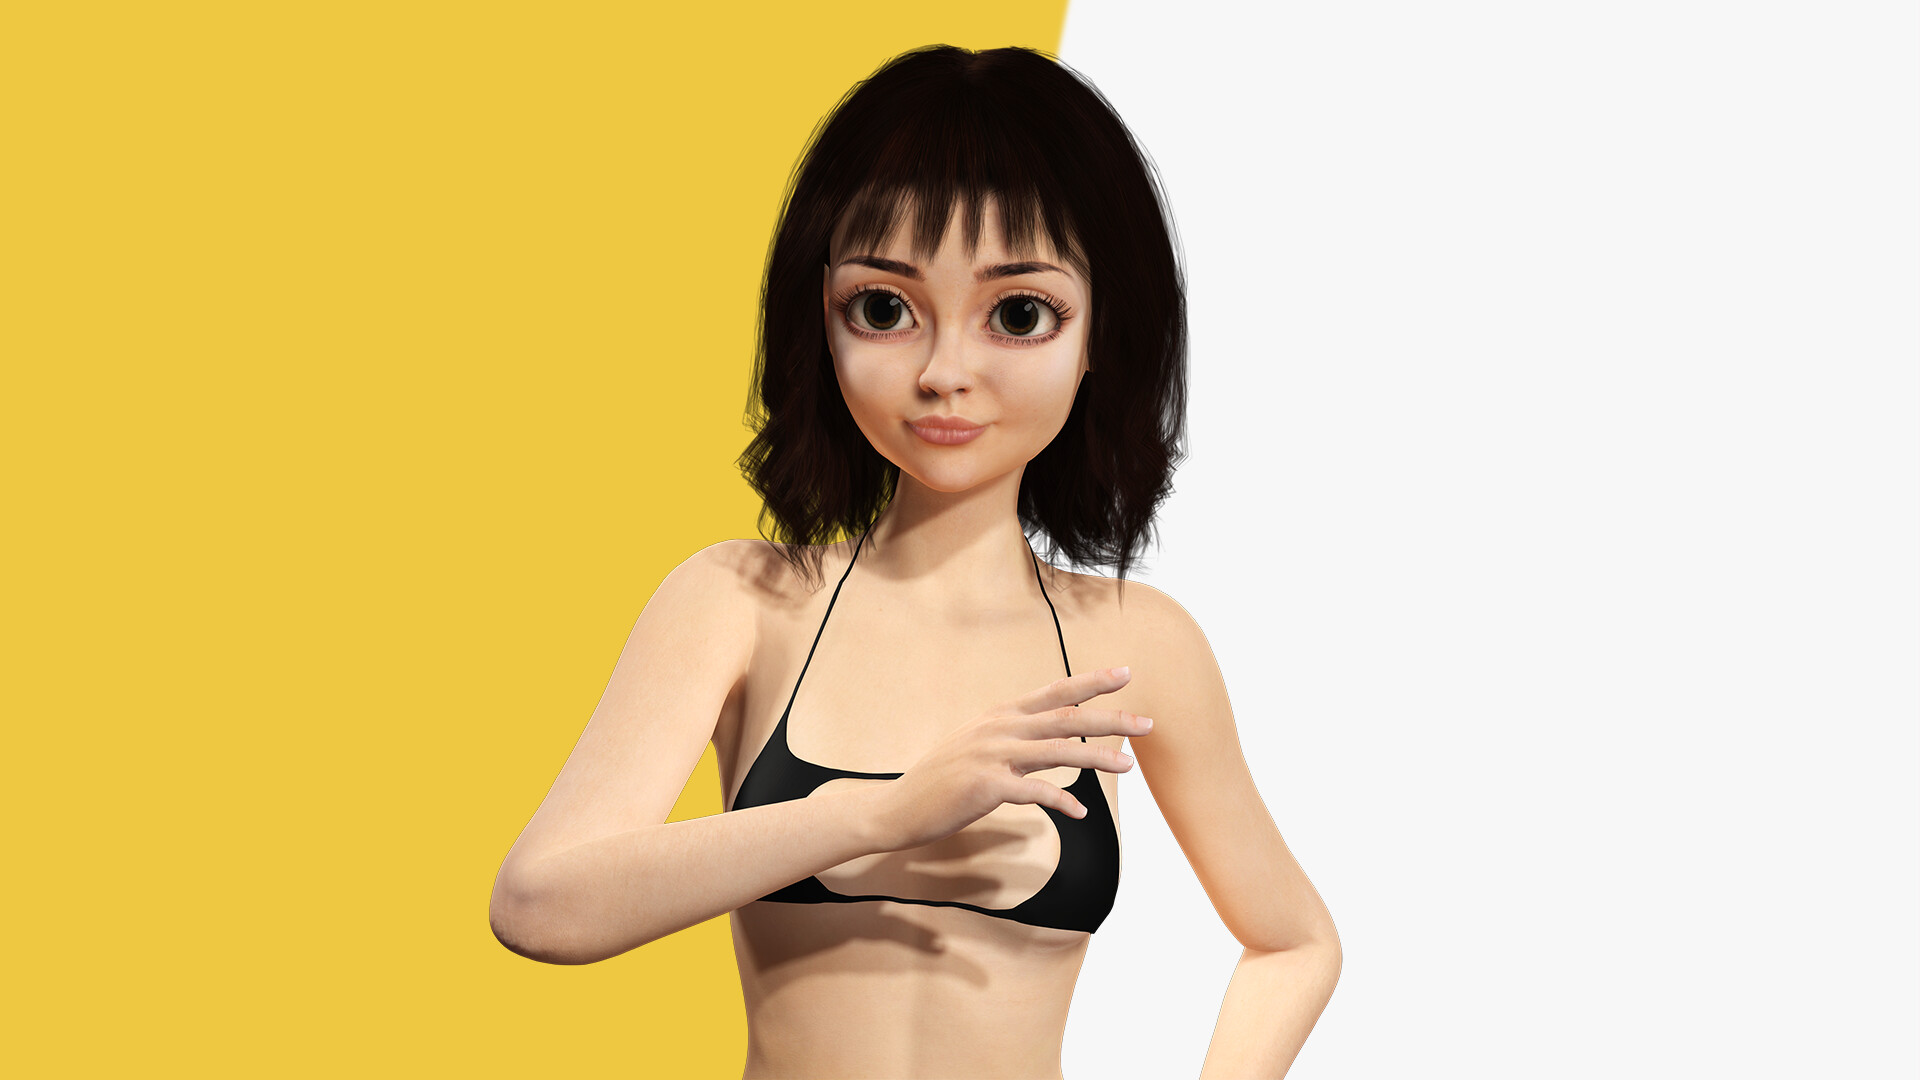 Realistic Toon Girls Nude - ArtStation - Realistic stylized cartoon Female 3D Model Naked Woman Rigged